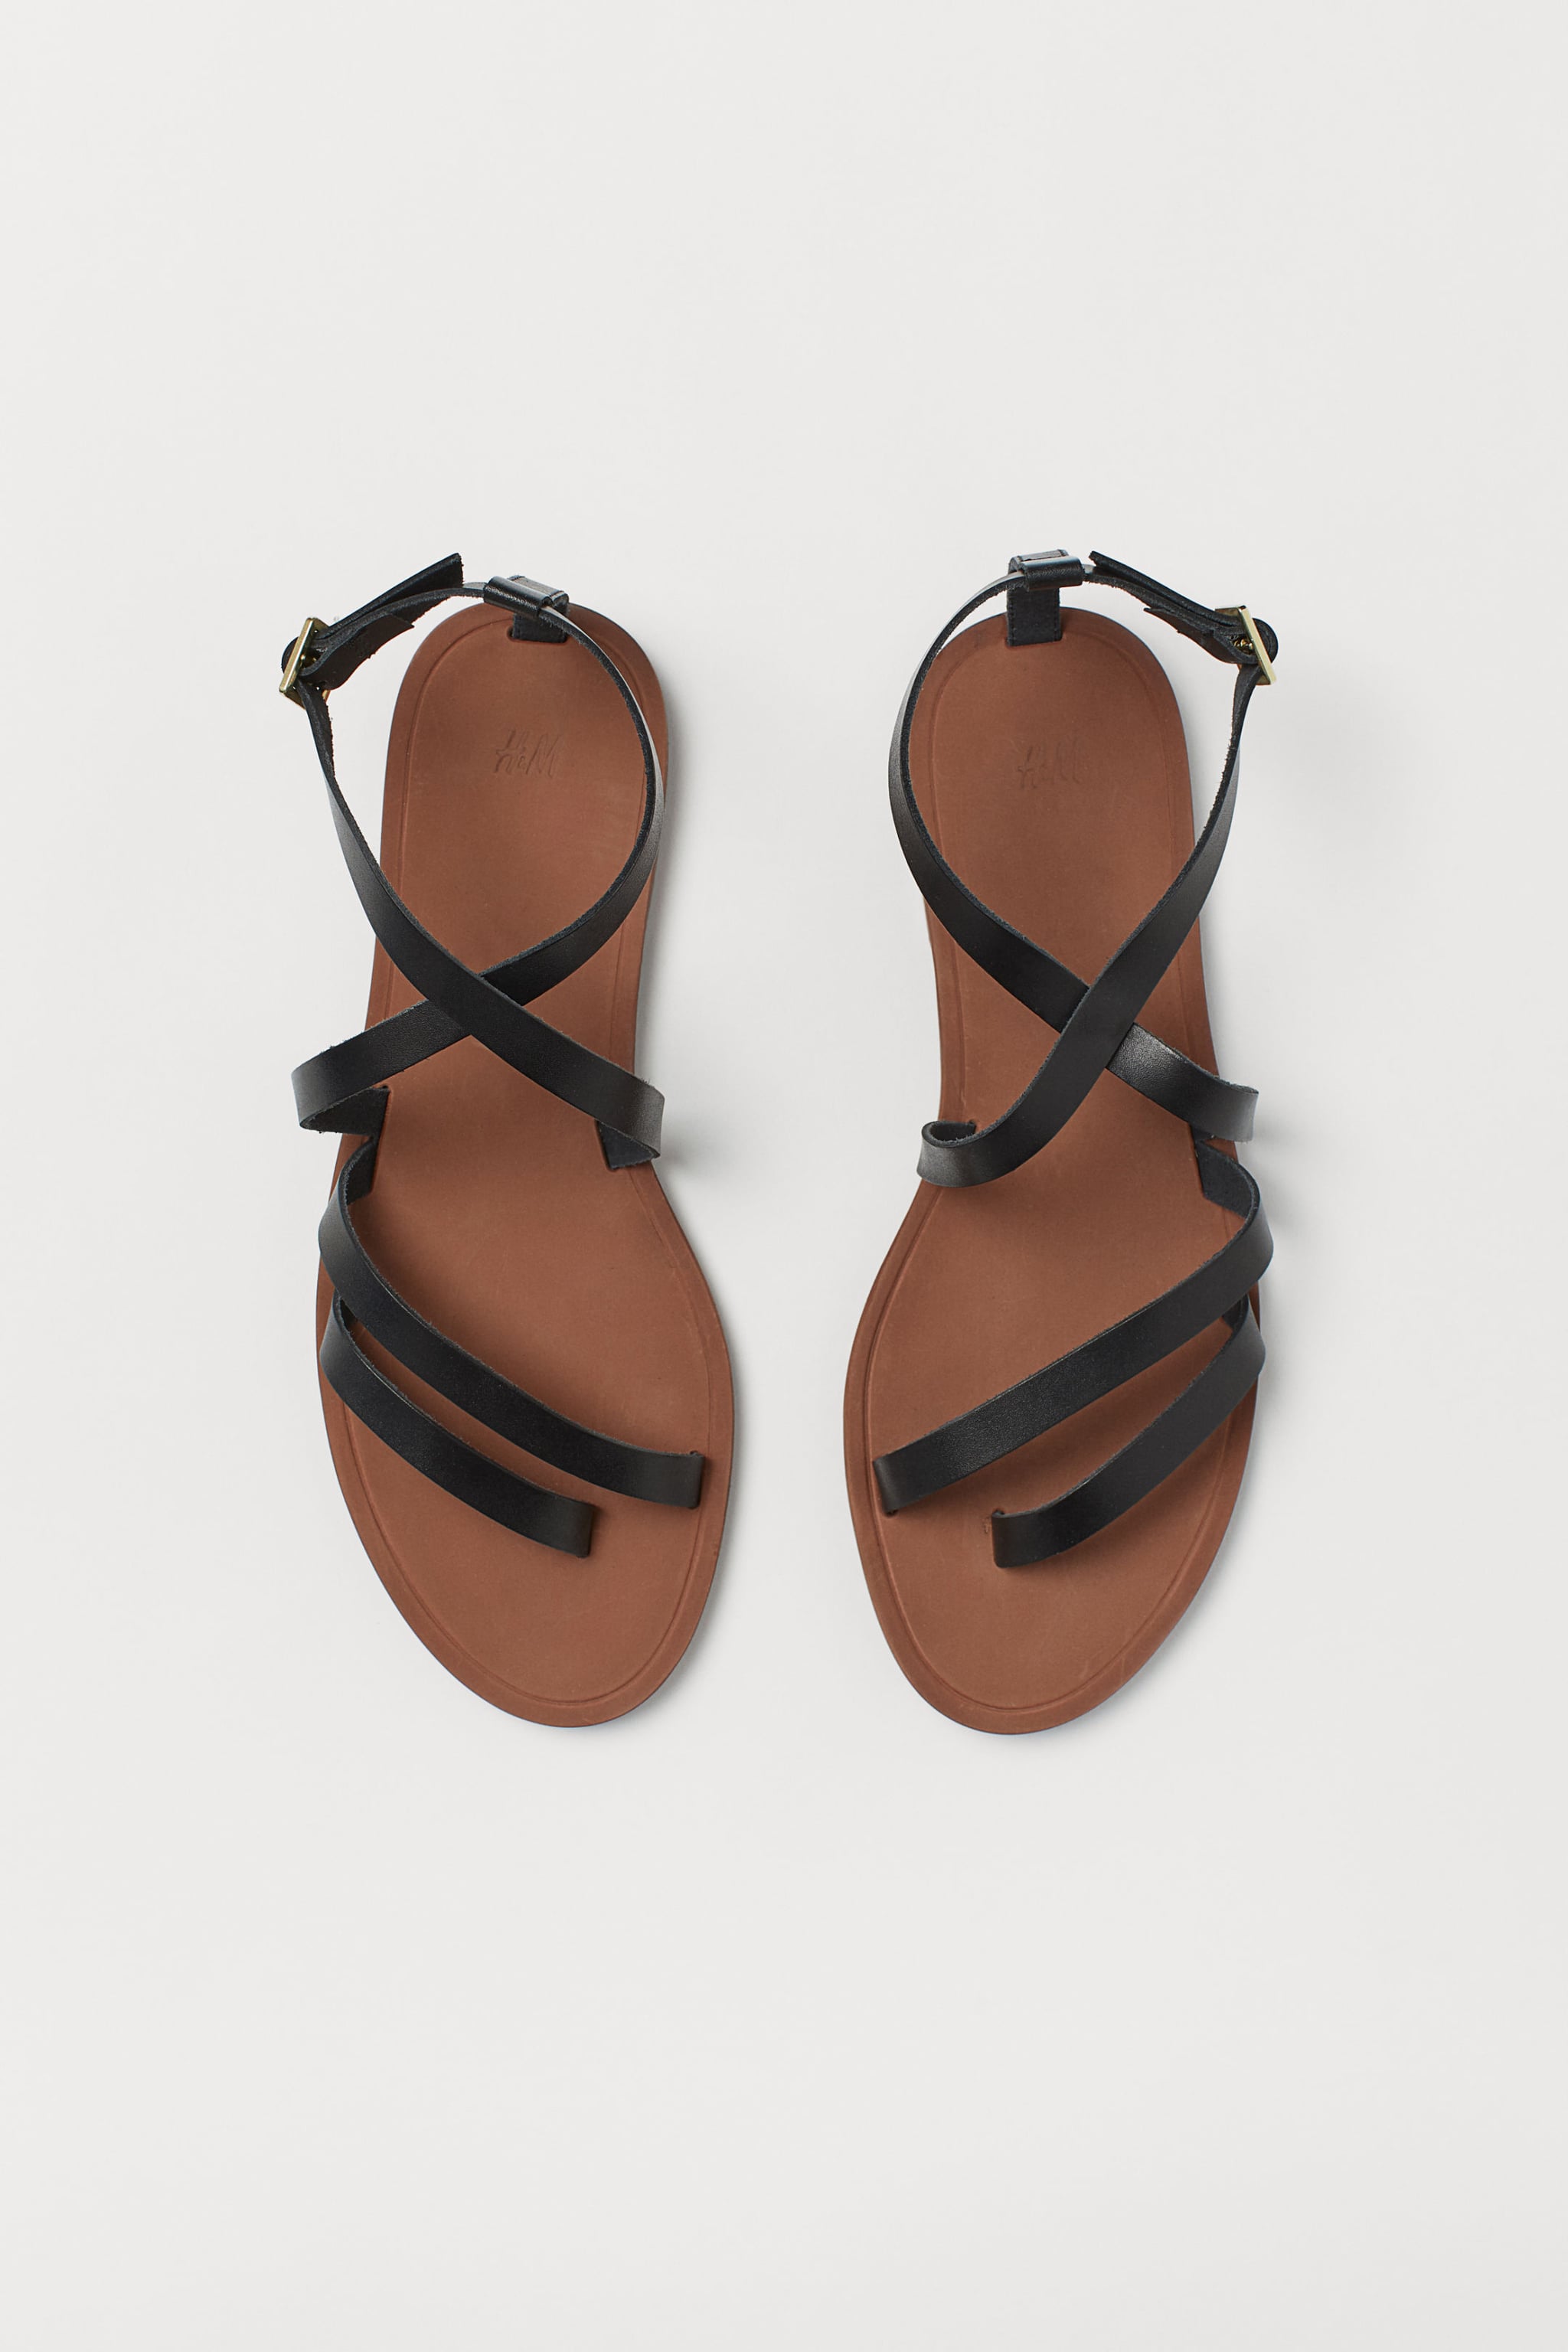 leather sandals 2019